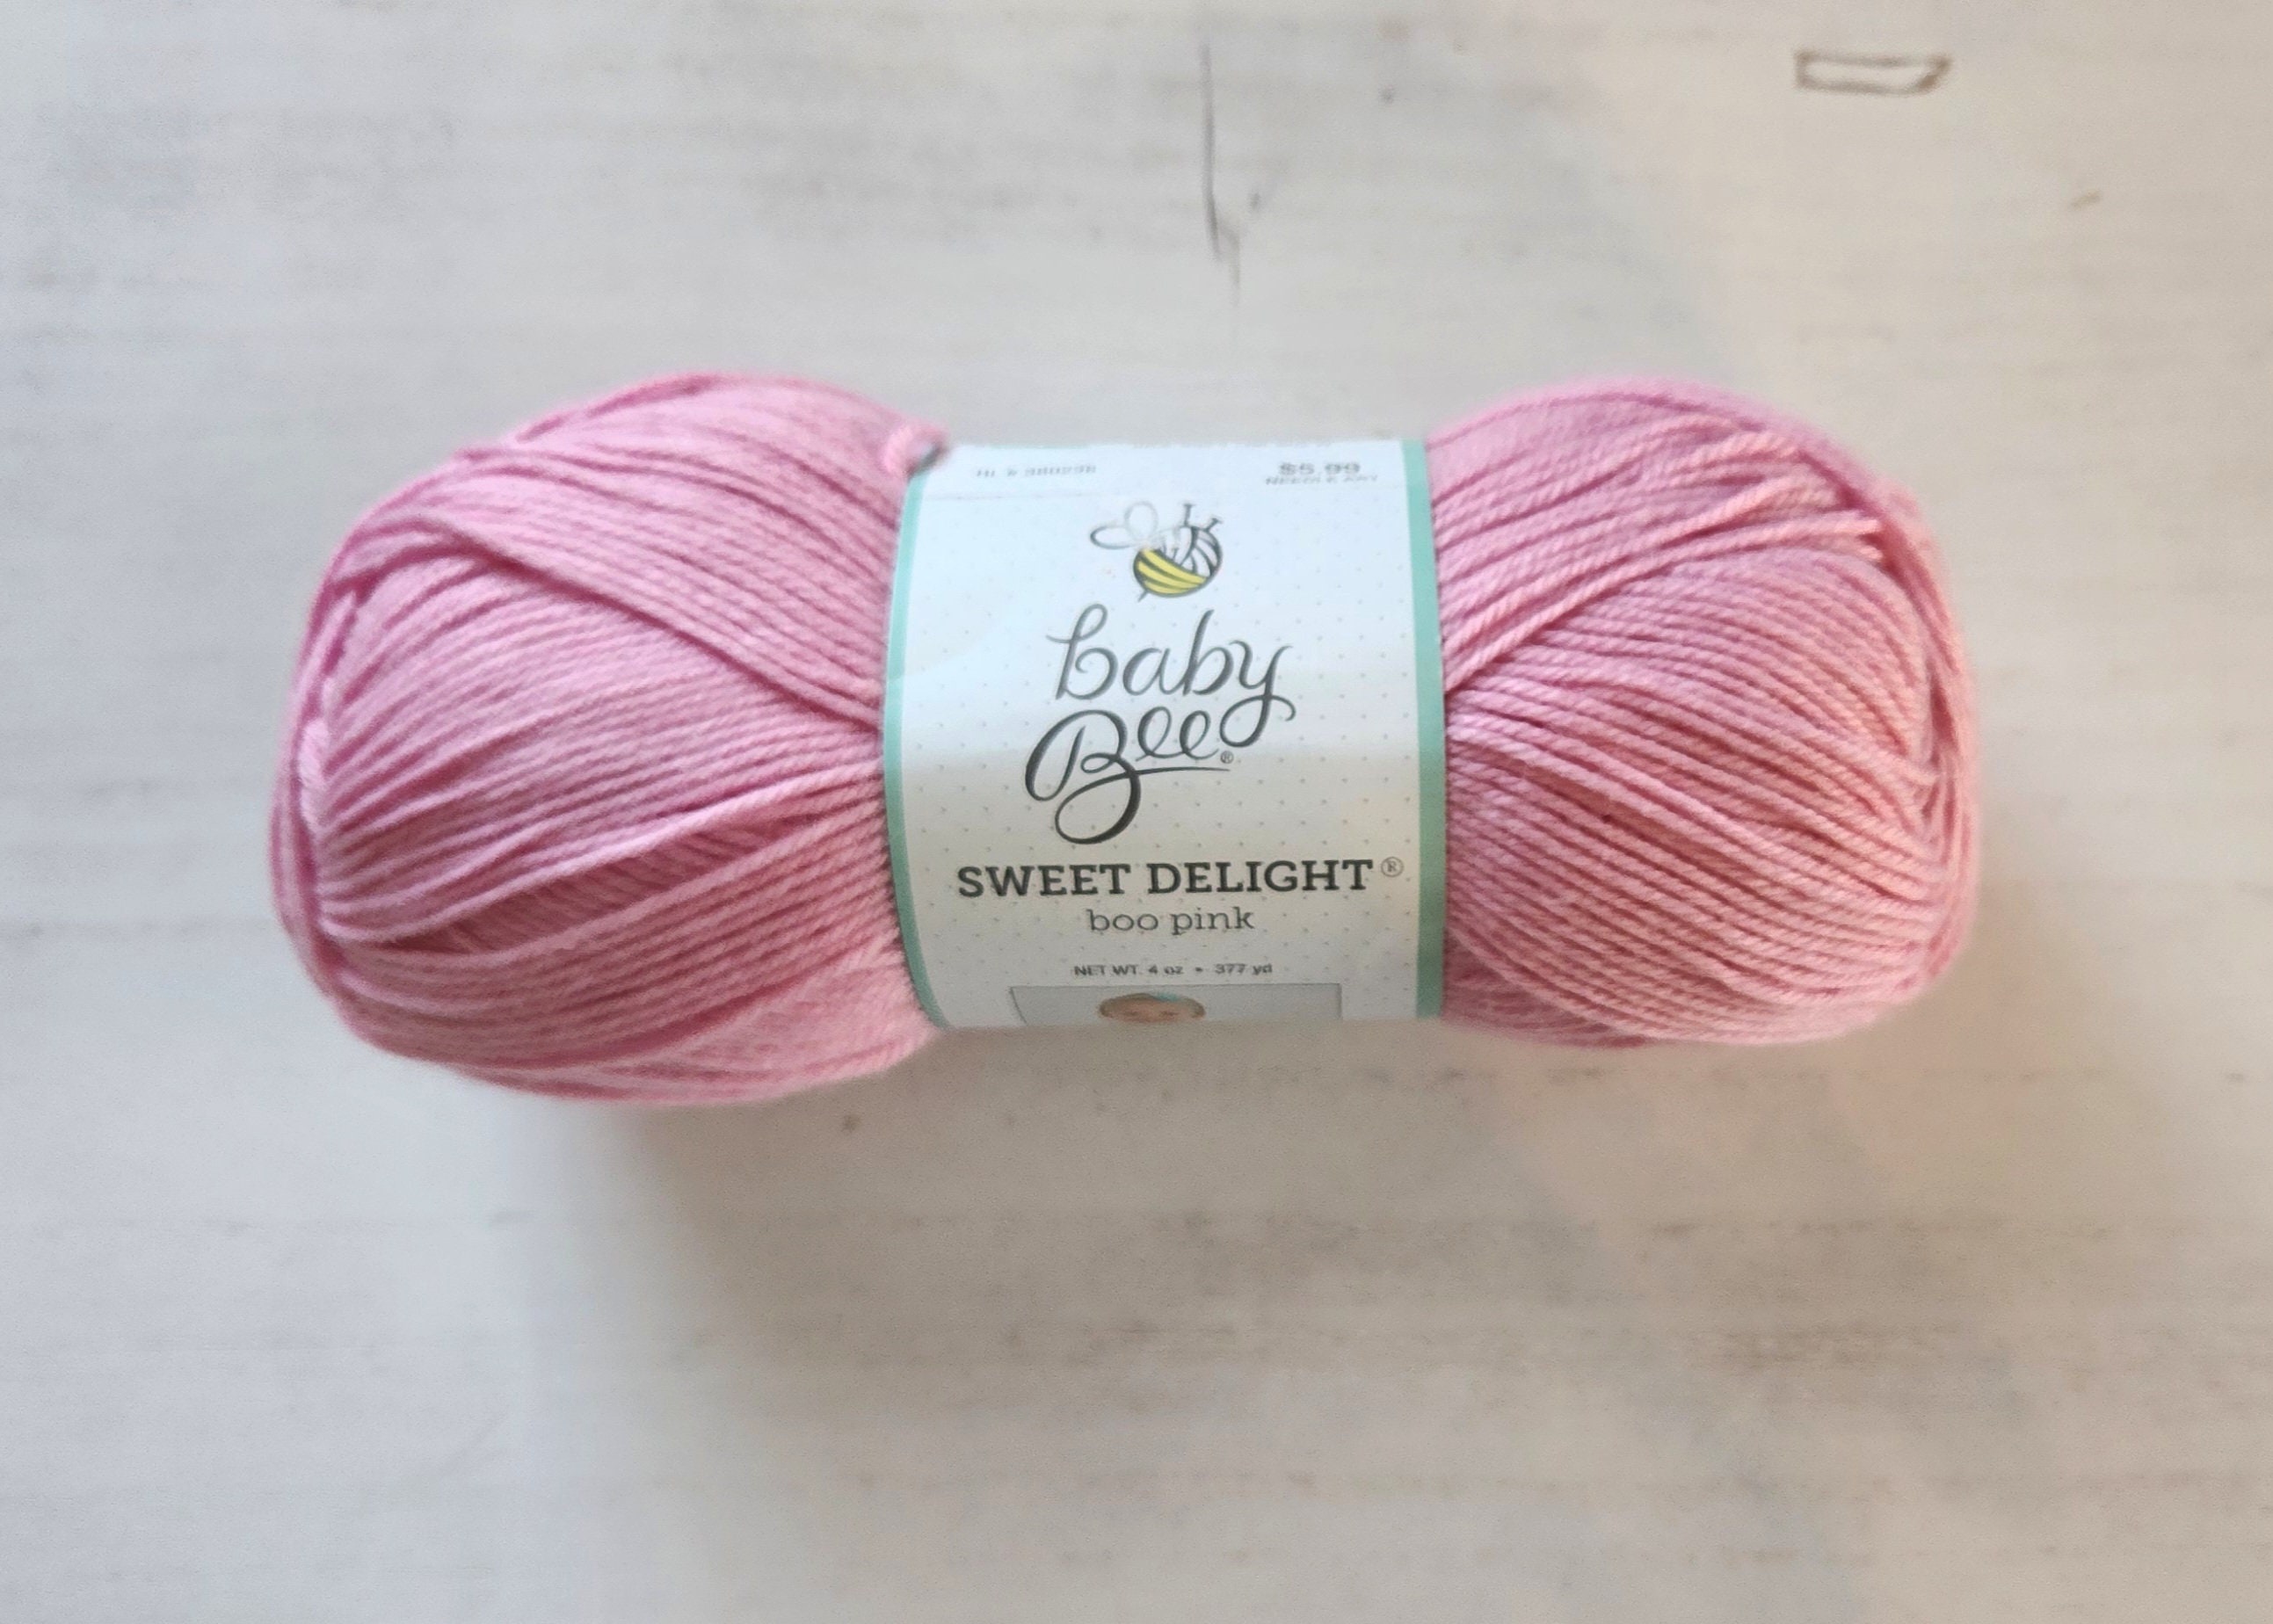 Baby Bee Yarn Sweet Delight Lot of 2 Color is Pink-a-boo, 377 yards each NEW